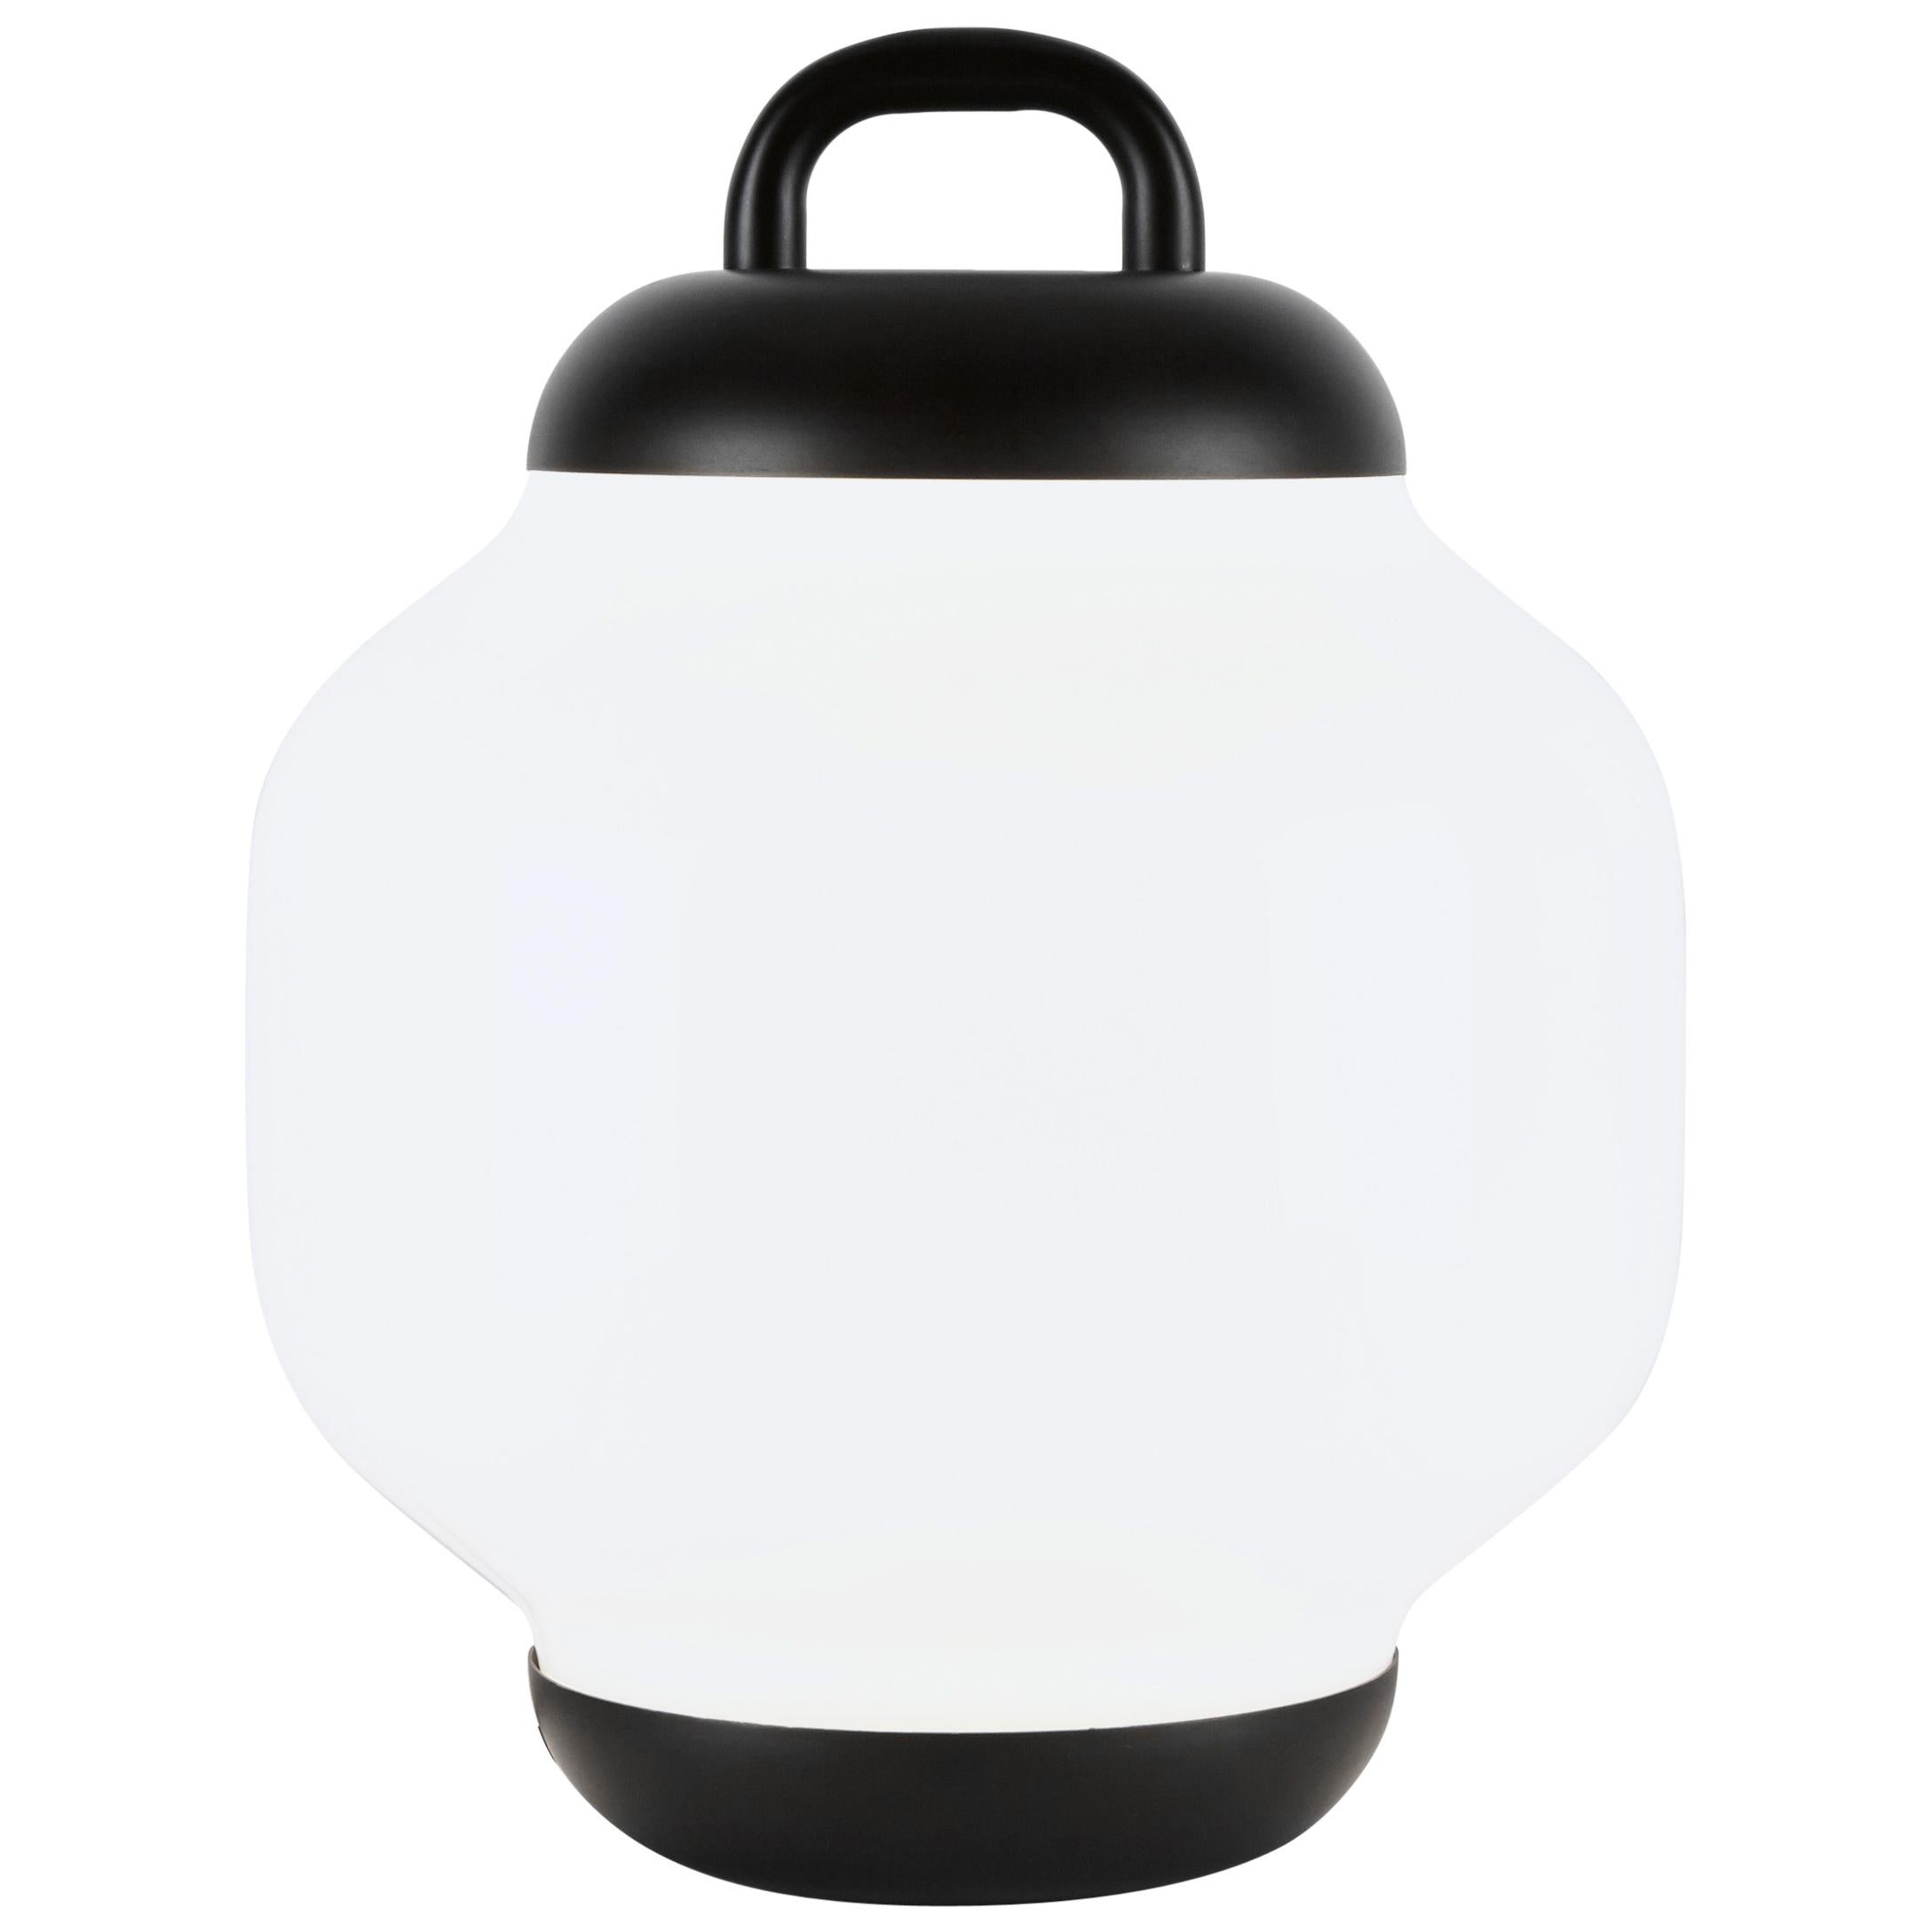 Esper Table Lamp in Black by Visibility for Roll & Hill